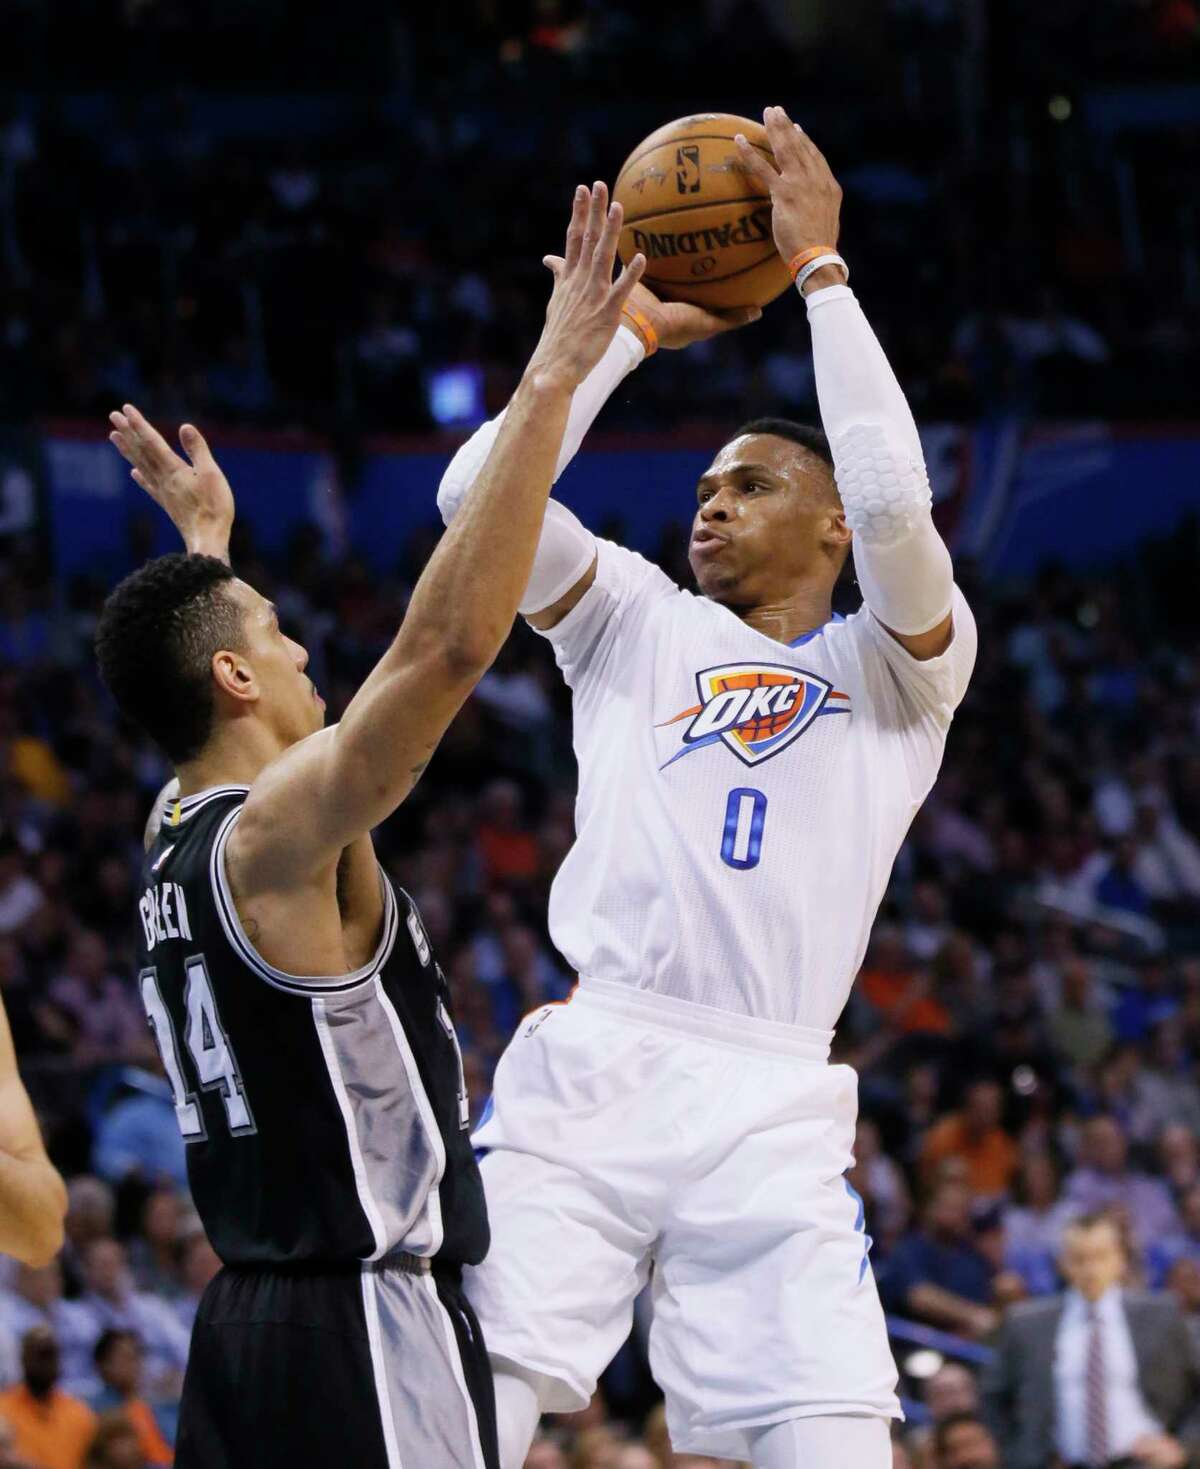 Oklahoma City Thunder guard Russell Westbrook (0) shoots in front of San Antonio Spurs guard Danny Green (14) during the first quarter of an NBA basketball game in Oklahoma City, Thursday, March 9, 2017. (AP Photo/Sue Ogrocki)